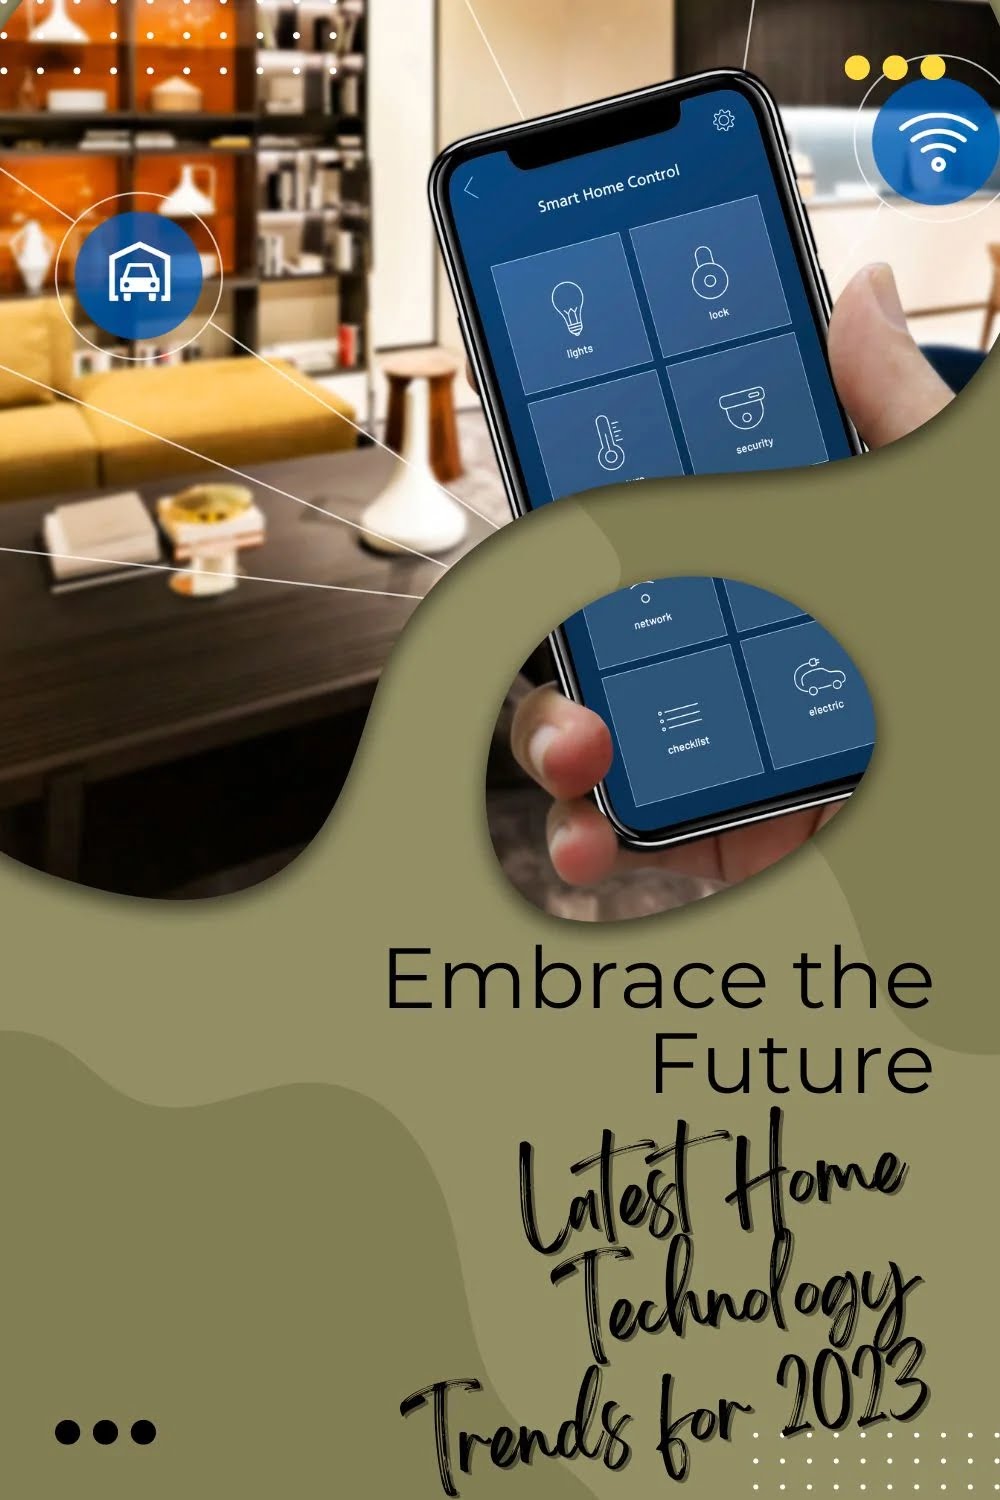 Embrace the Future: Latest Home Technology Trends for 2023